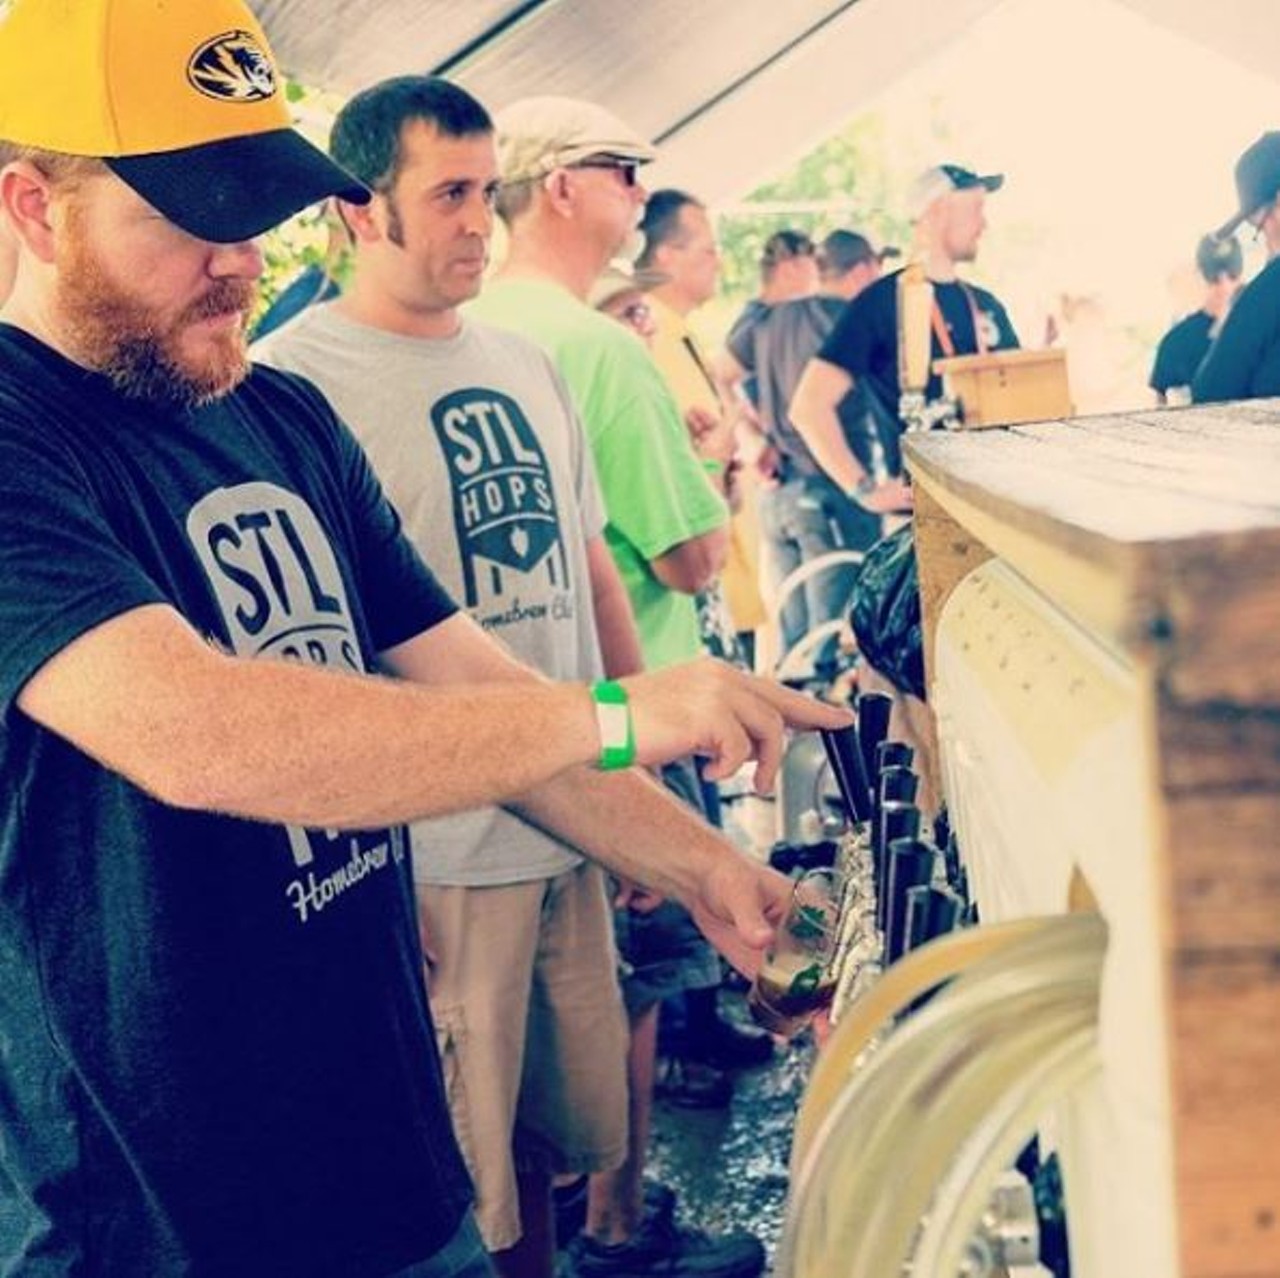 Arbormeisters Home Brew and Craft Beer Festival
September 8, 2018
Creve Coeur, MO
St. Louis went from being a beer town to being a craft beer town. Our craft beer community is strong, active and competitive. Want to check out what some genius has been brewing in his basement? These brewers have been bubbling up some home recipes and are eager for you to try them. Arrive thirsty.
Photo courtesy of forestreleaf / Instagram
Find more information about the event here.